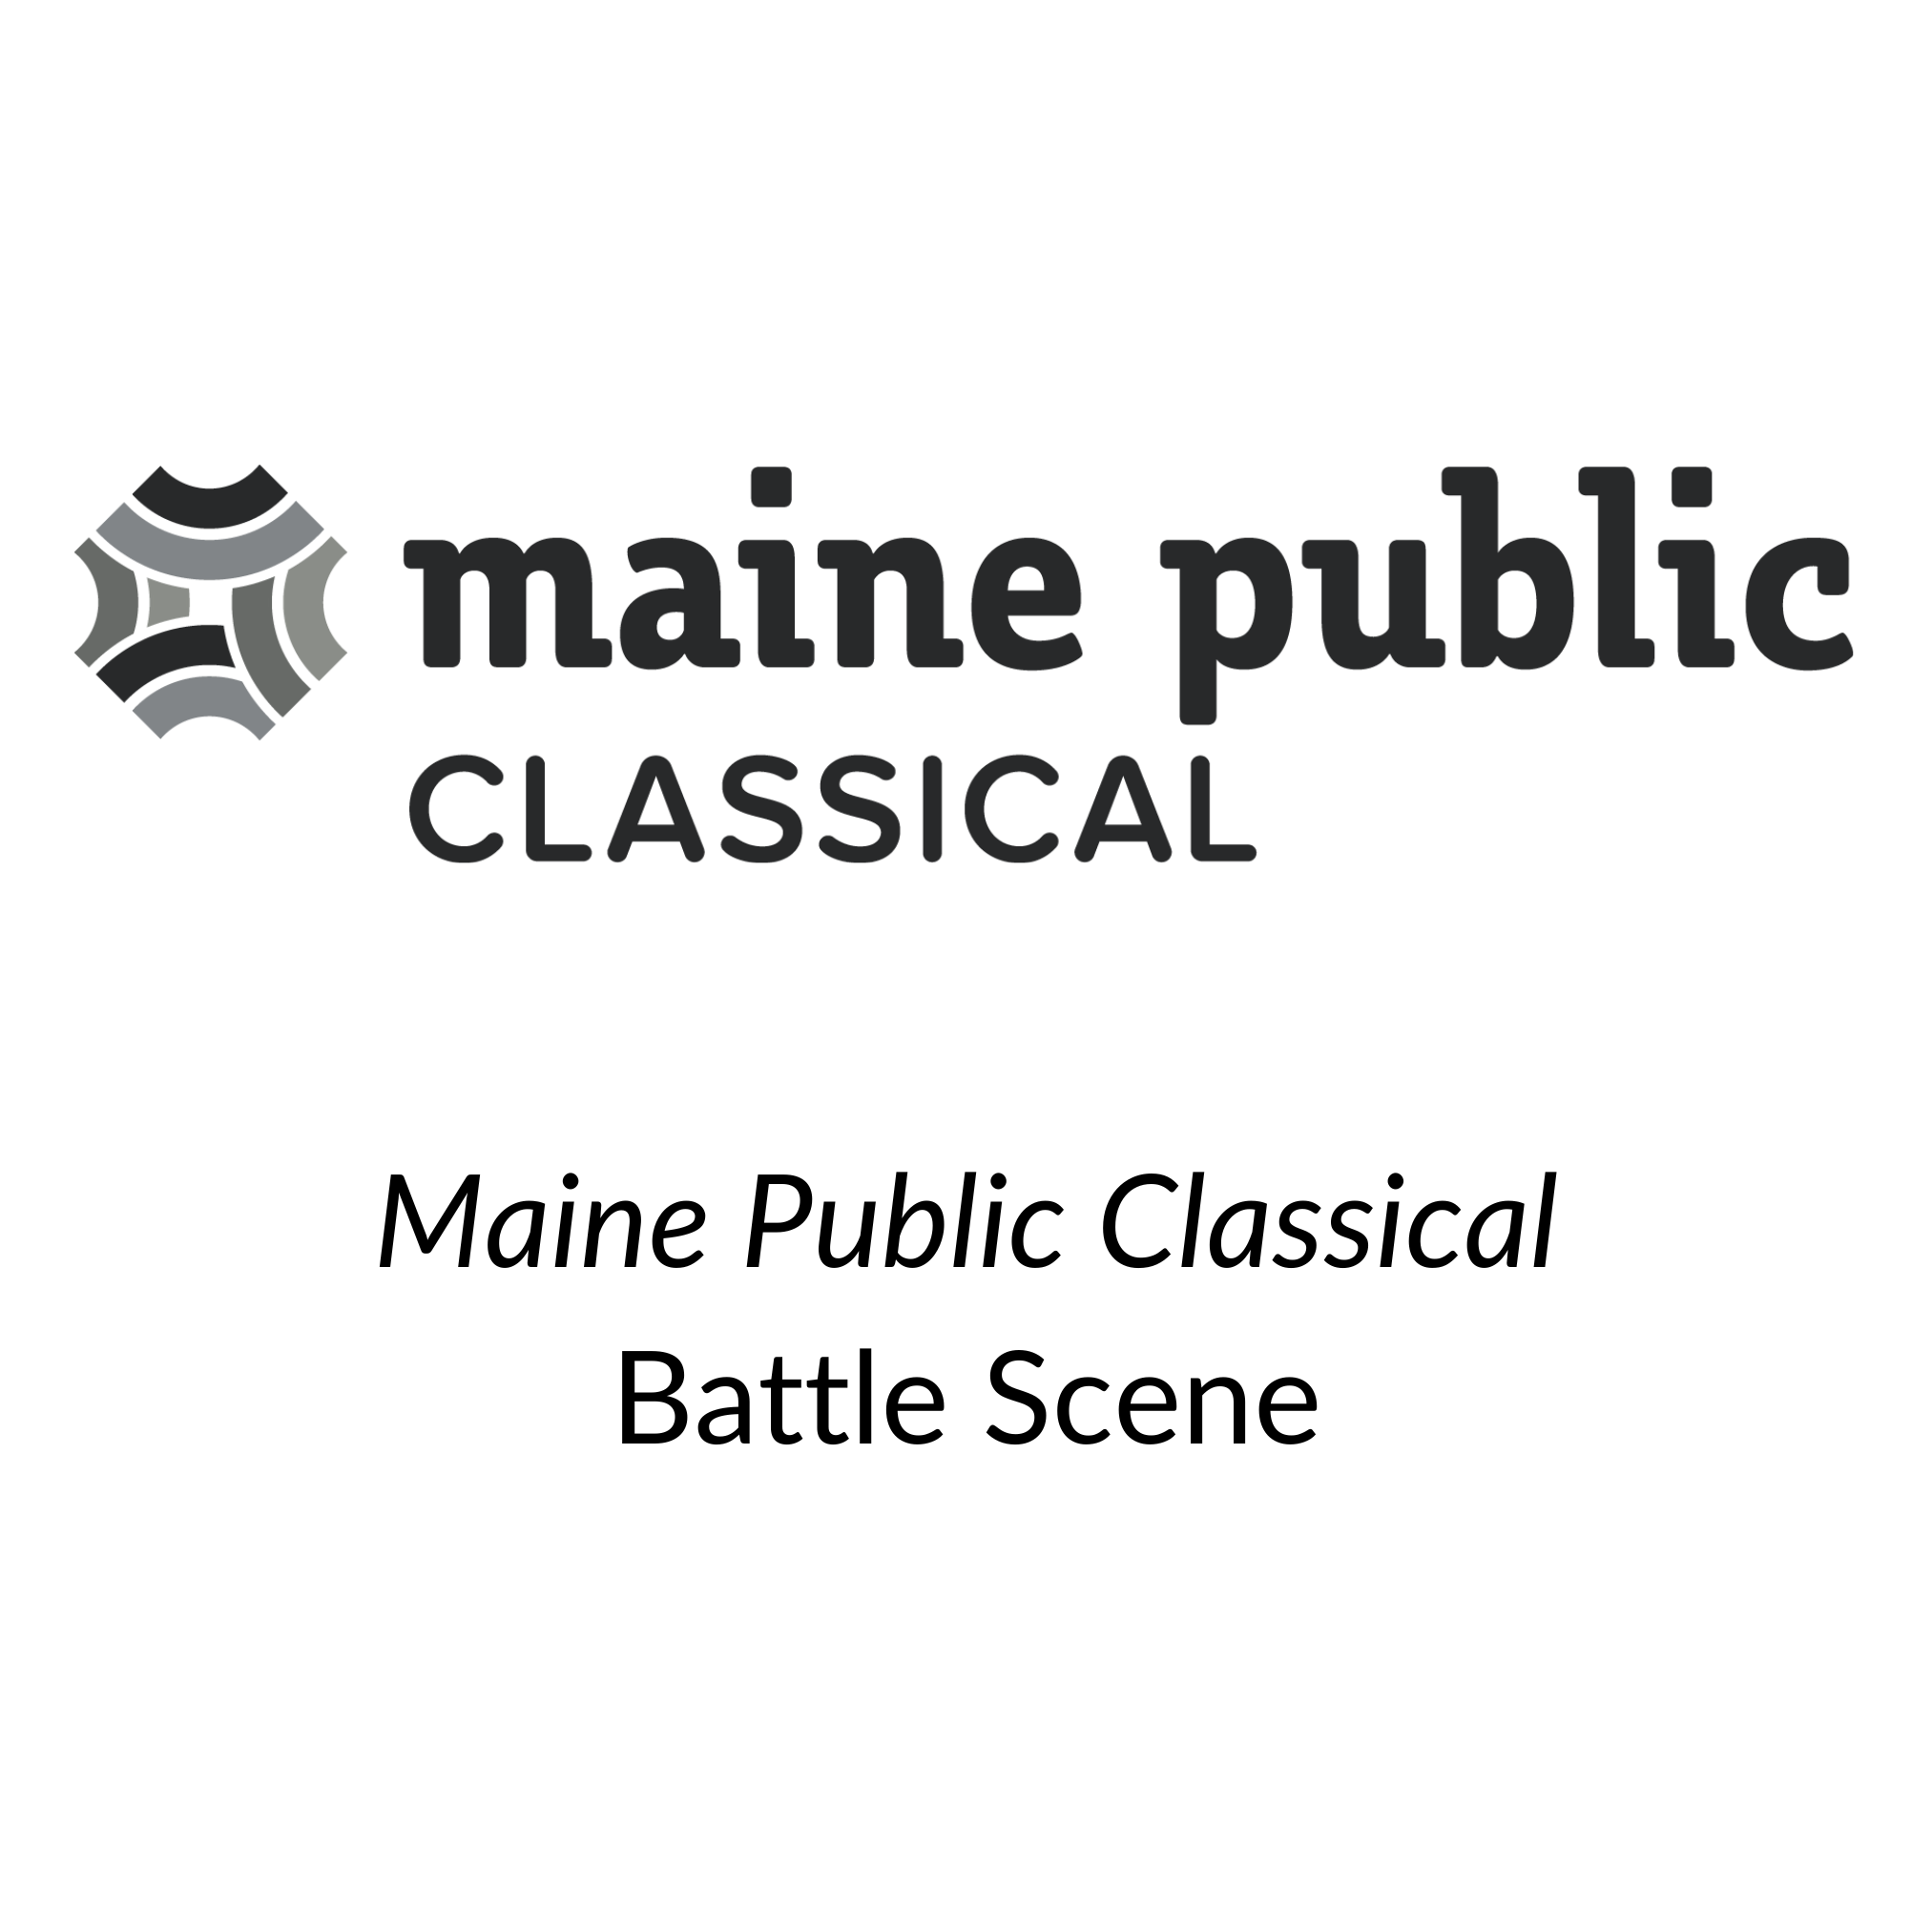 MainePublicClassical.png